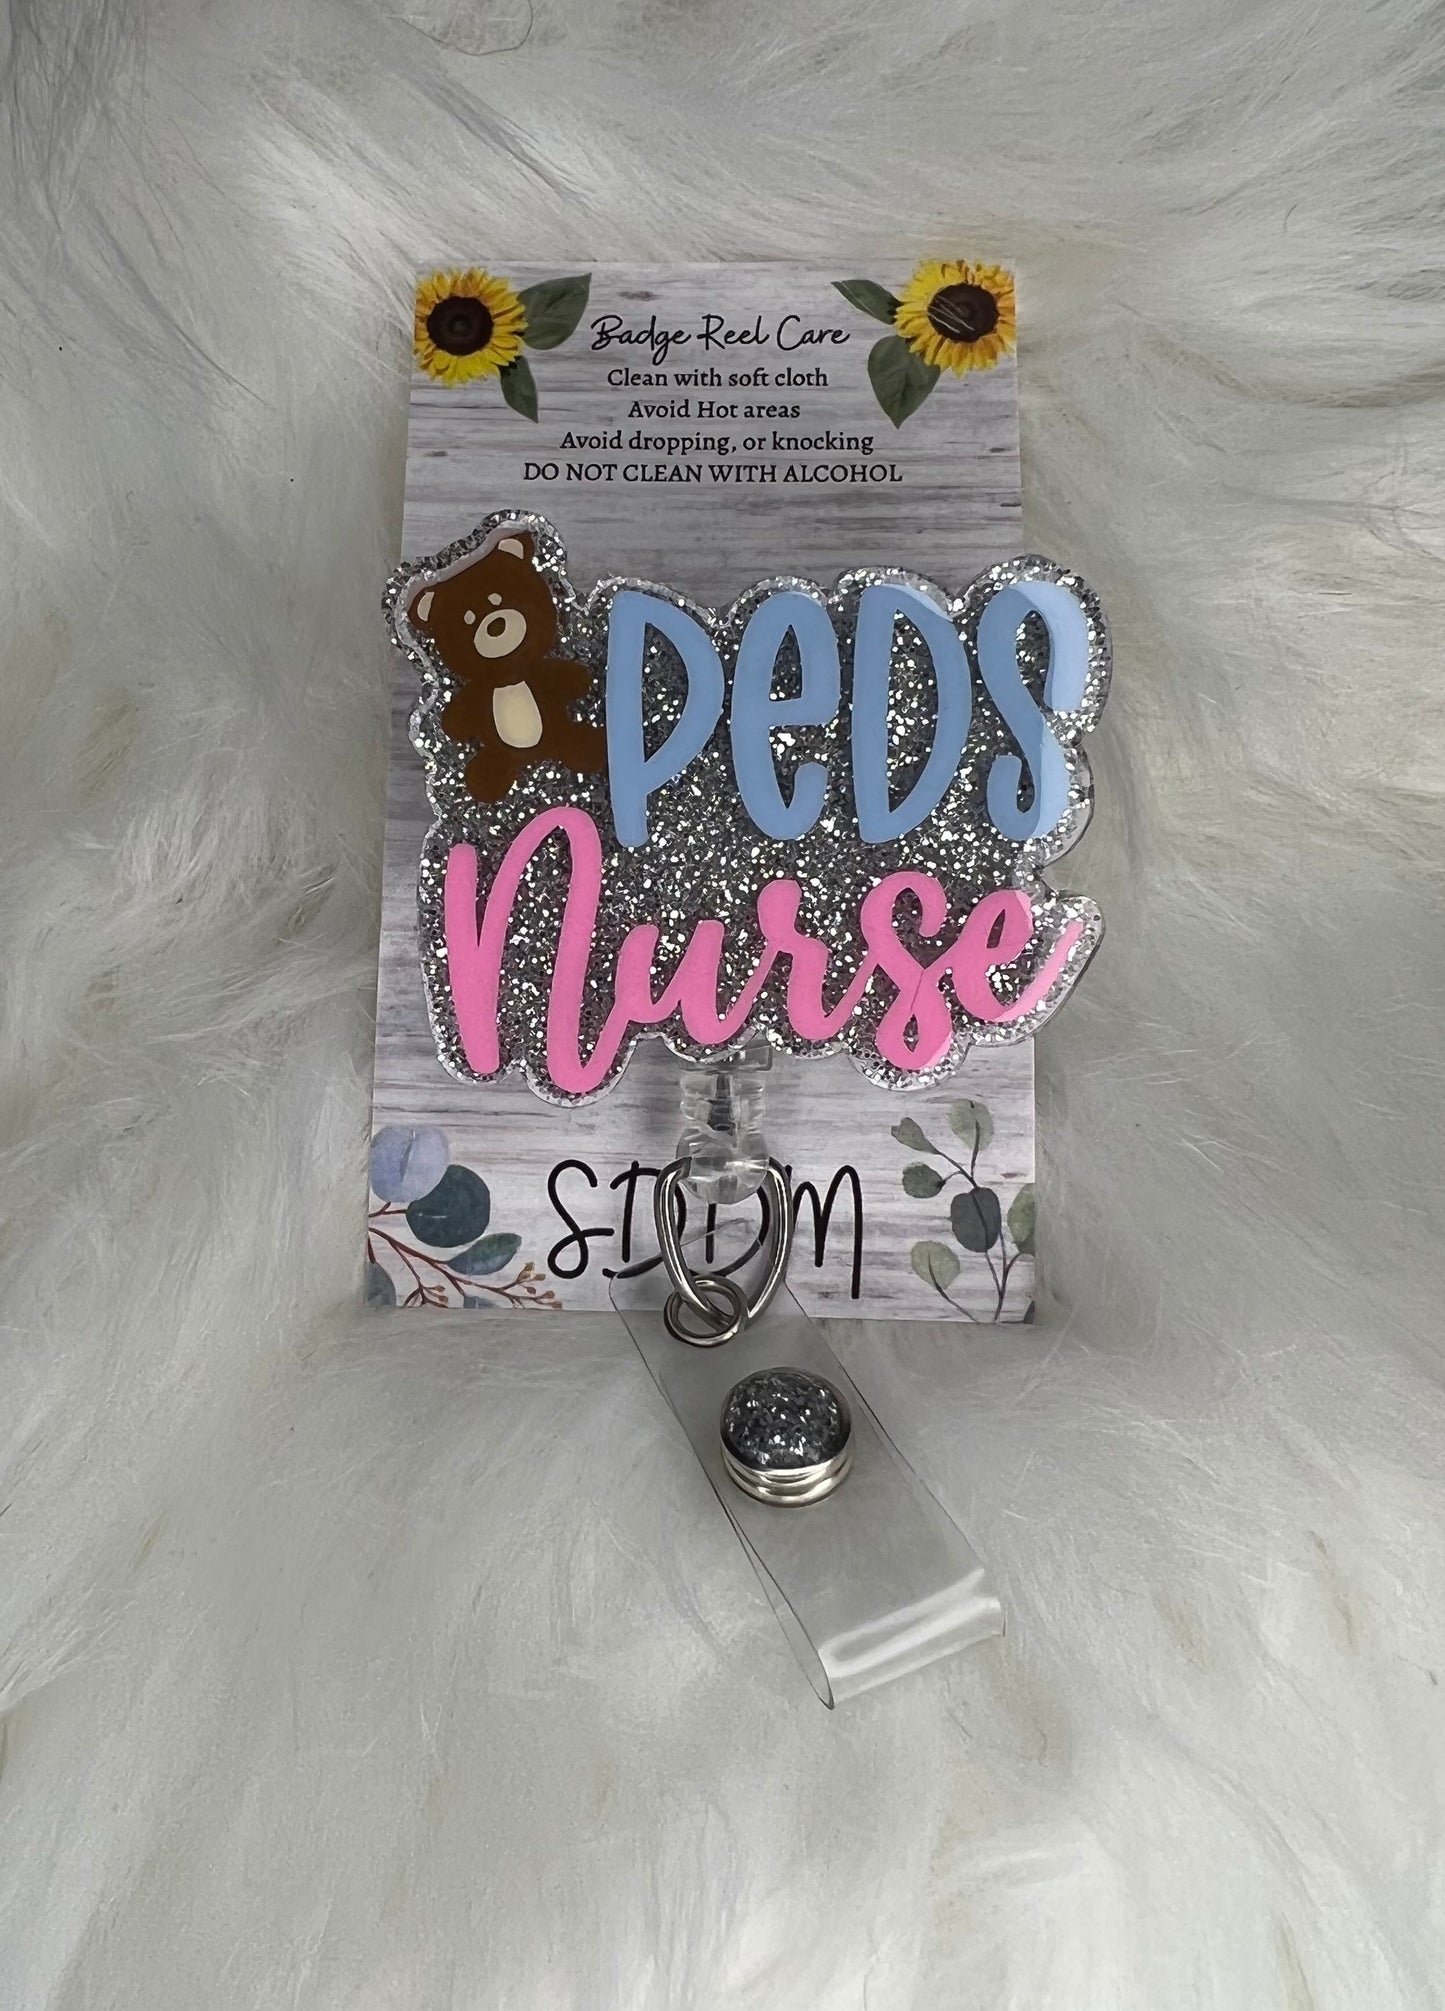 PEDS Nurse- Pediatrician-Pediatric Nurse- Badge holders RN- LPN-nurse gifts-Christmas gifts for her-personalized gifts-handmade gifts